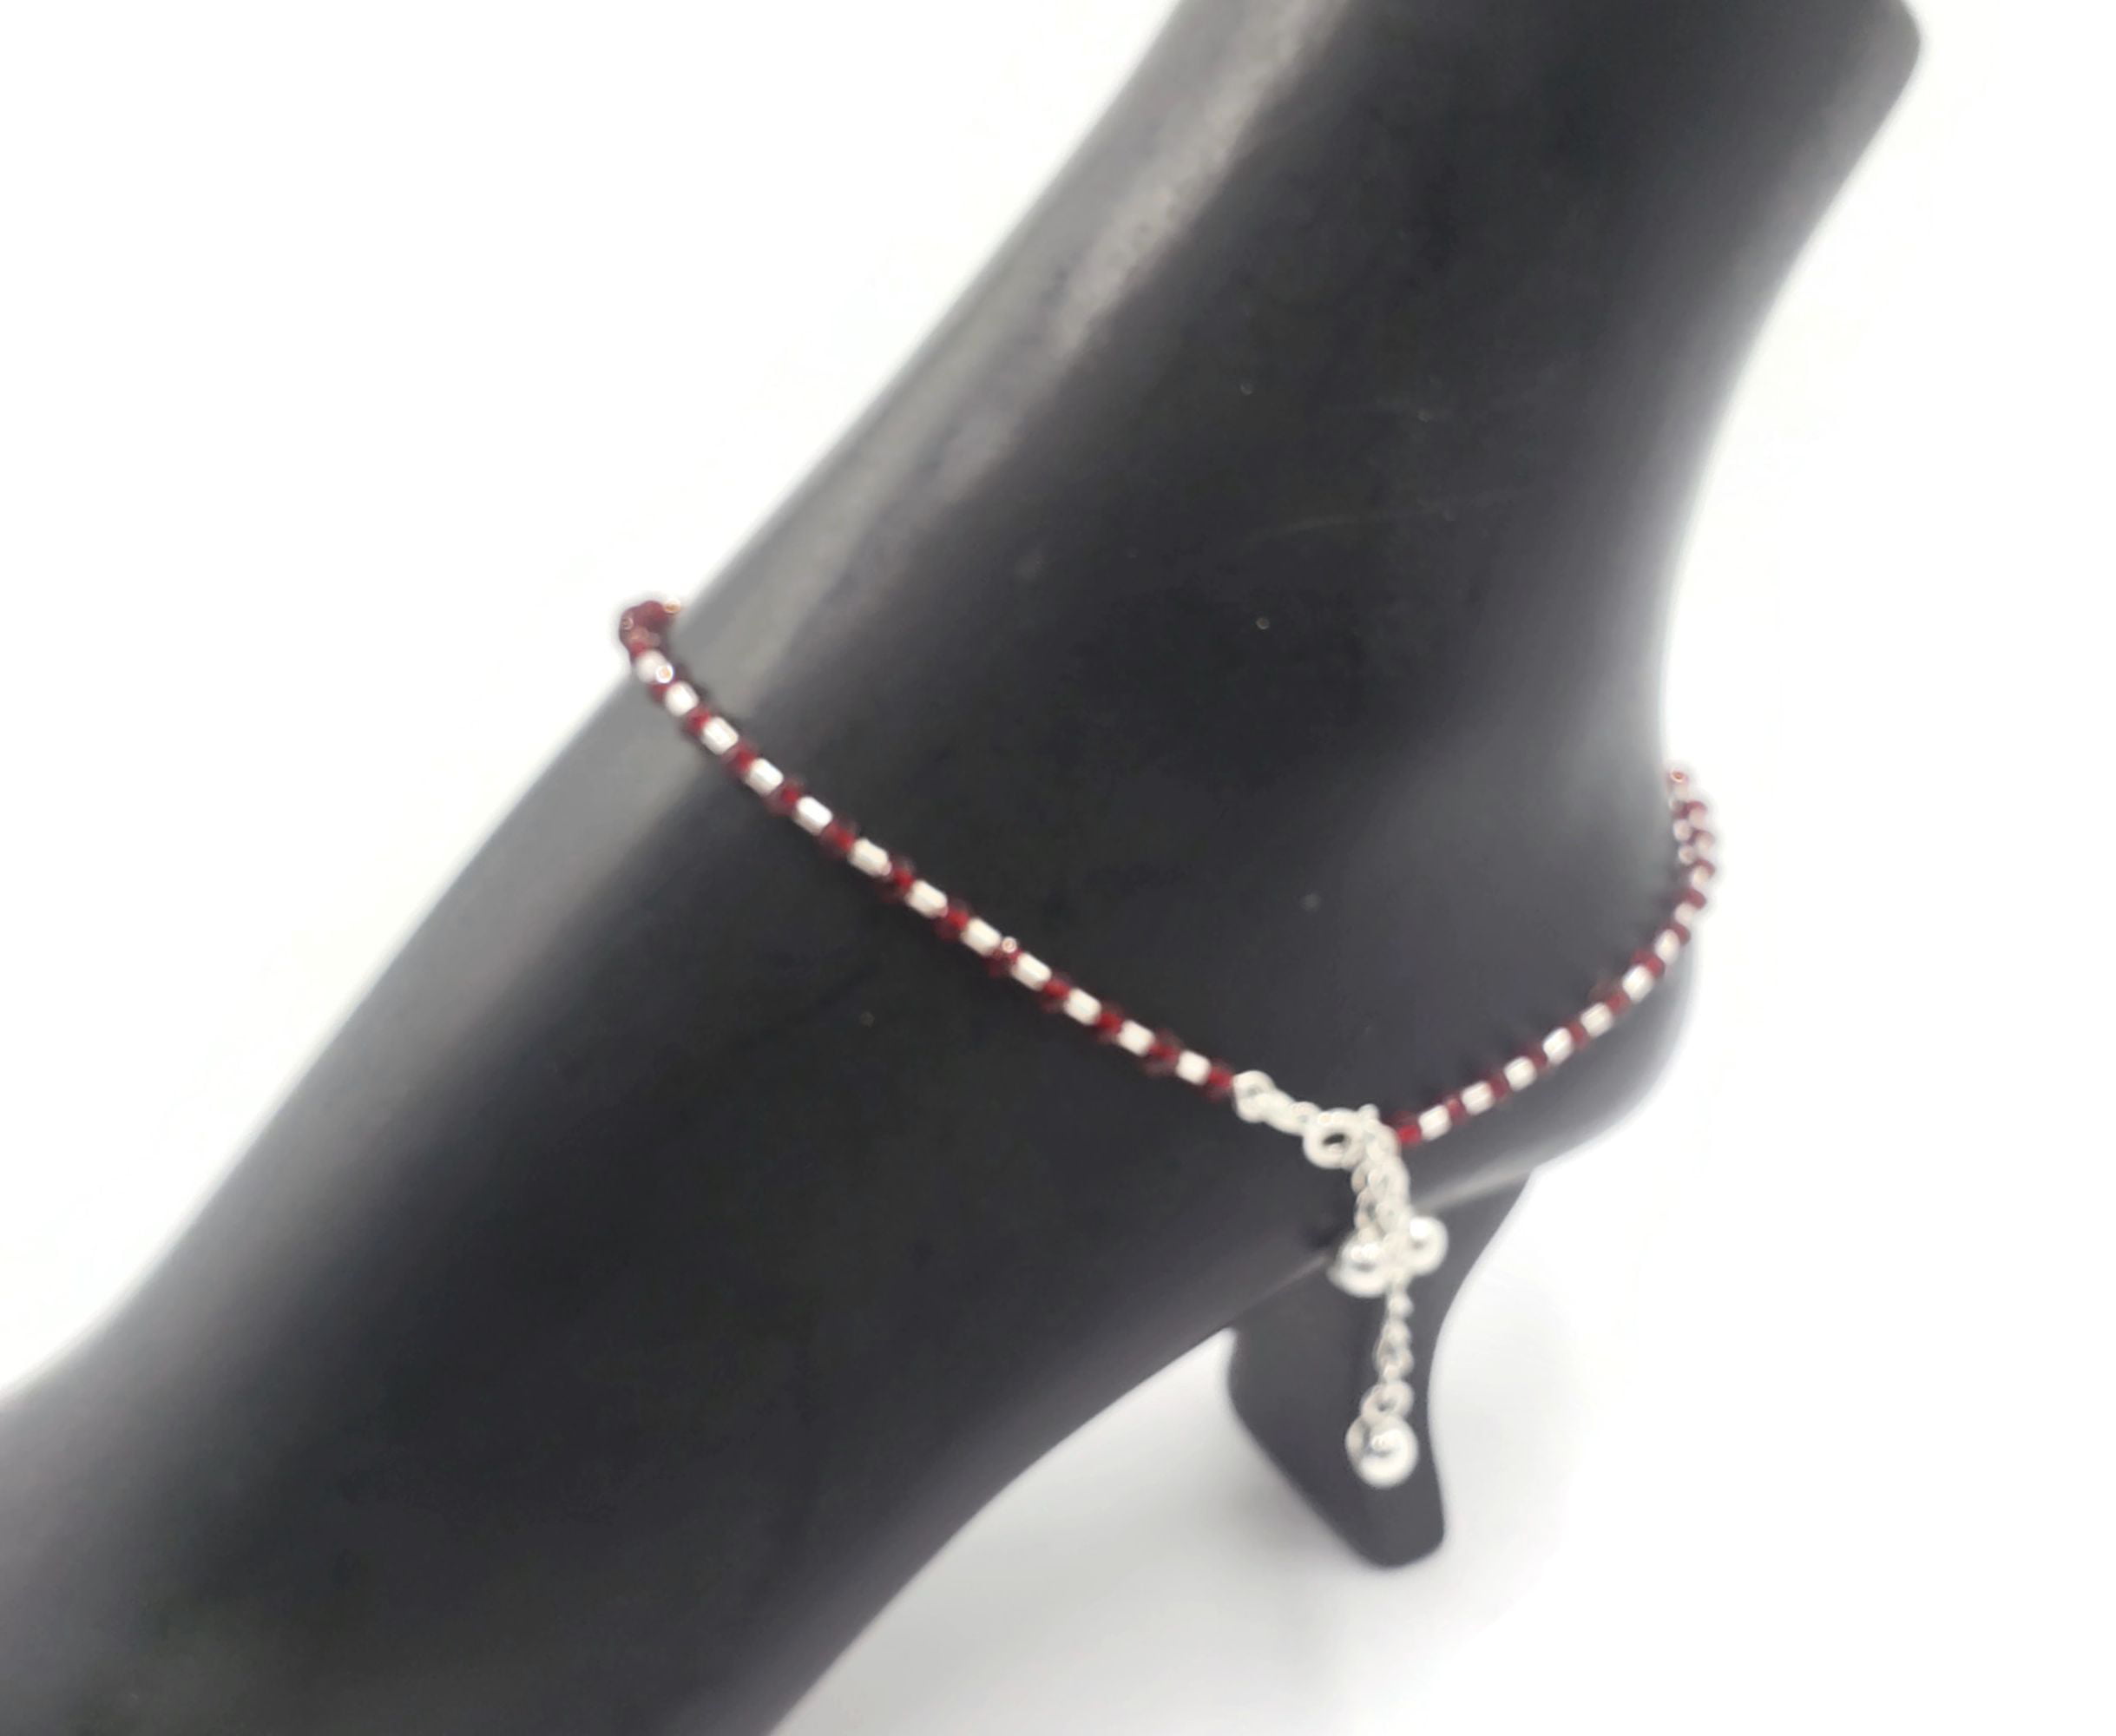 extra . 925 Sterling Silver Foot Jewelry Anklet "Stars" 8 in+2 in